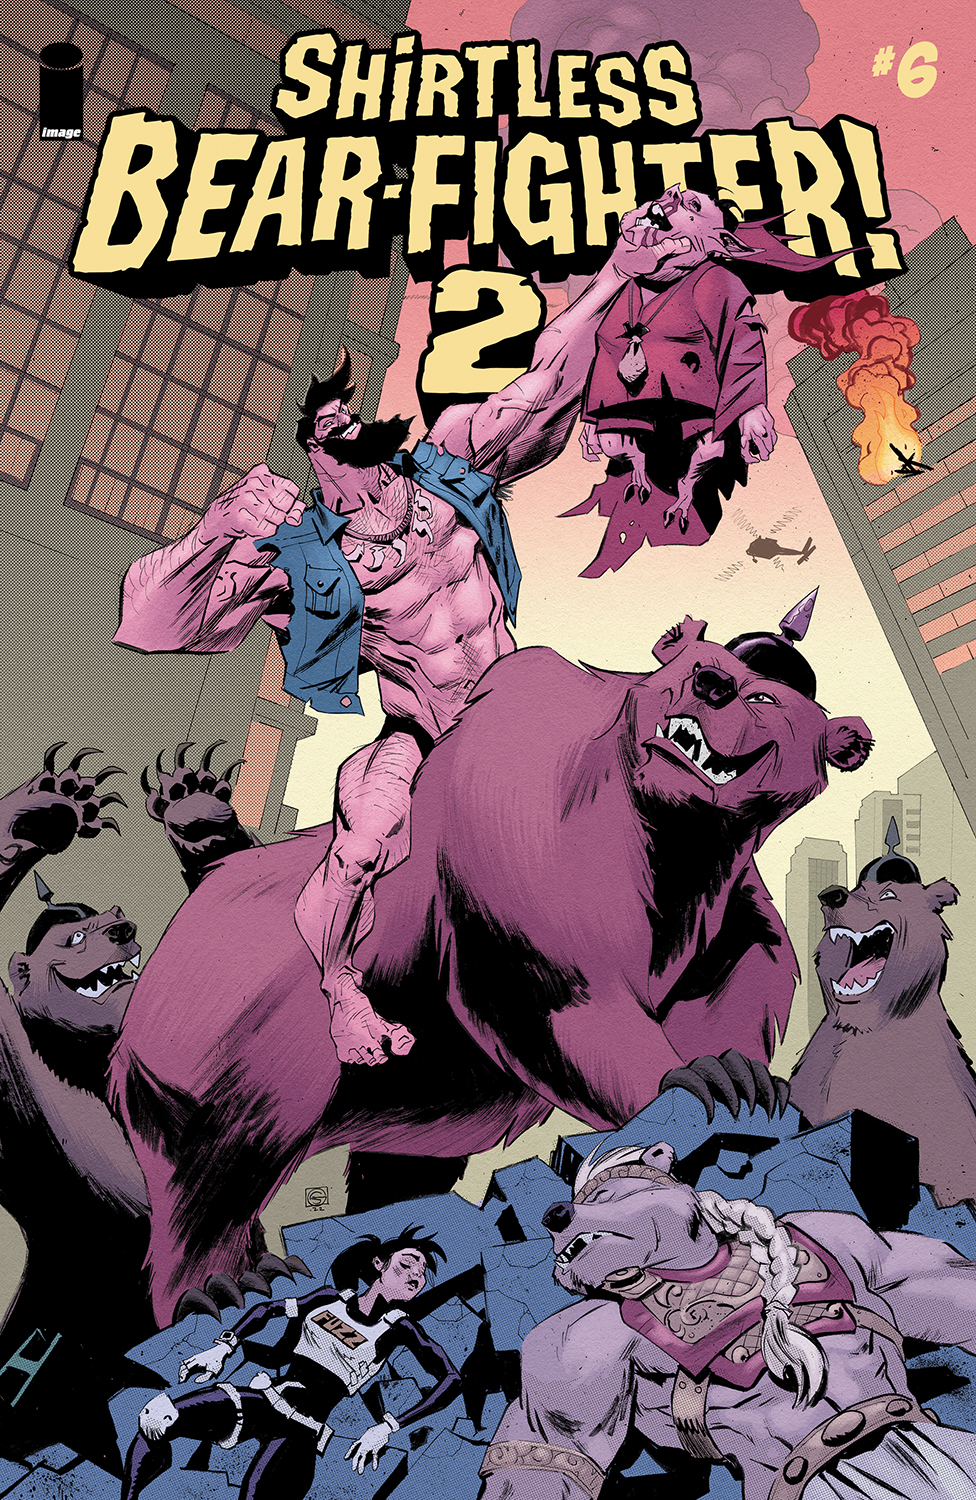 Shirtless Bear-Fighter 2 #6 Cover B Green (Of 7)